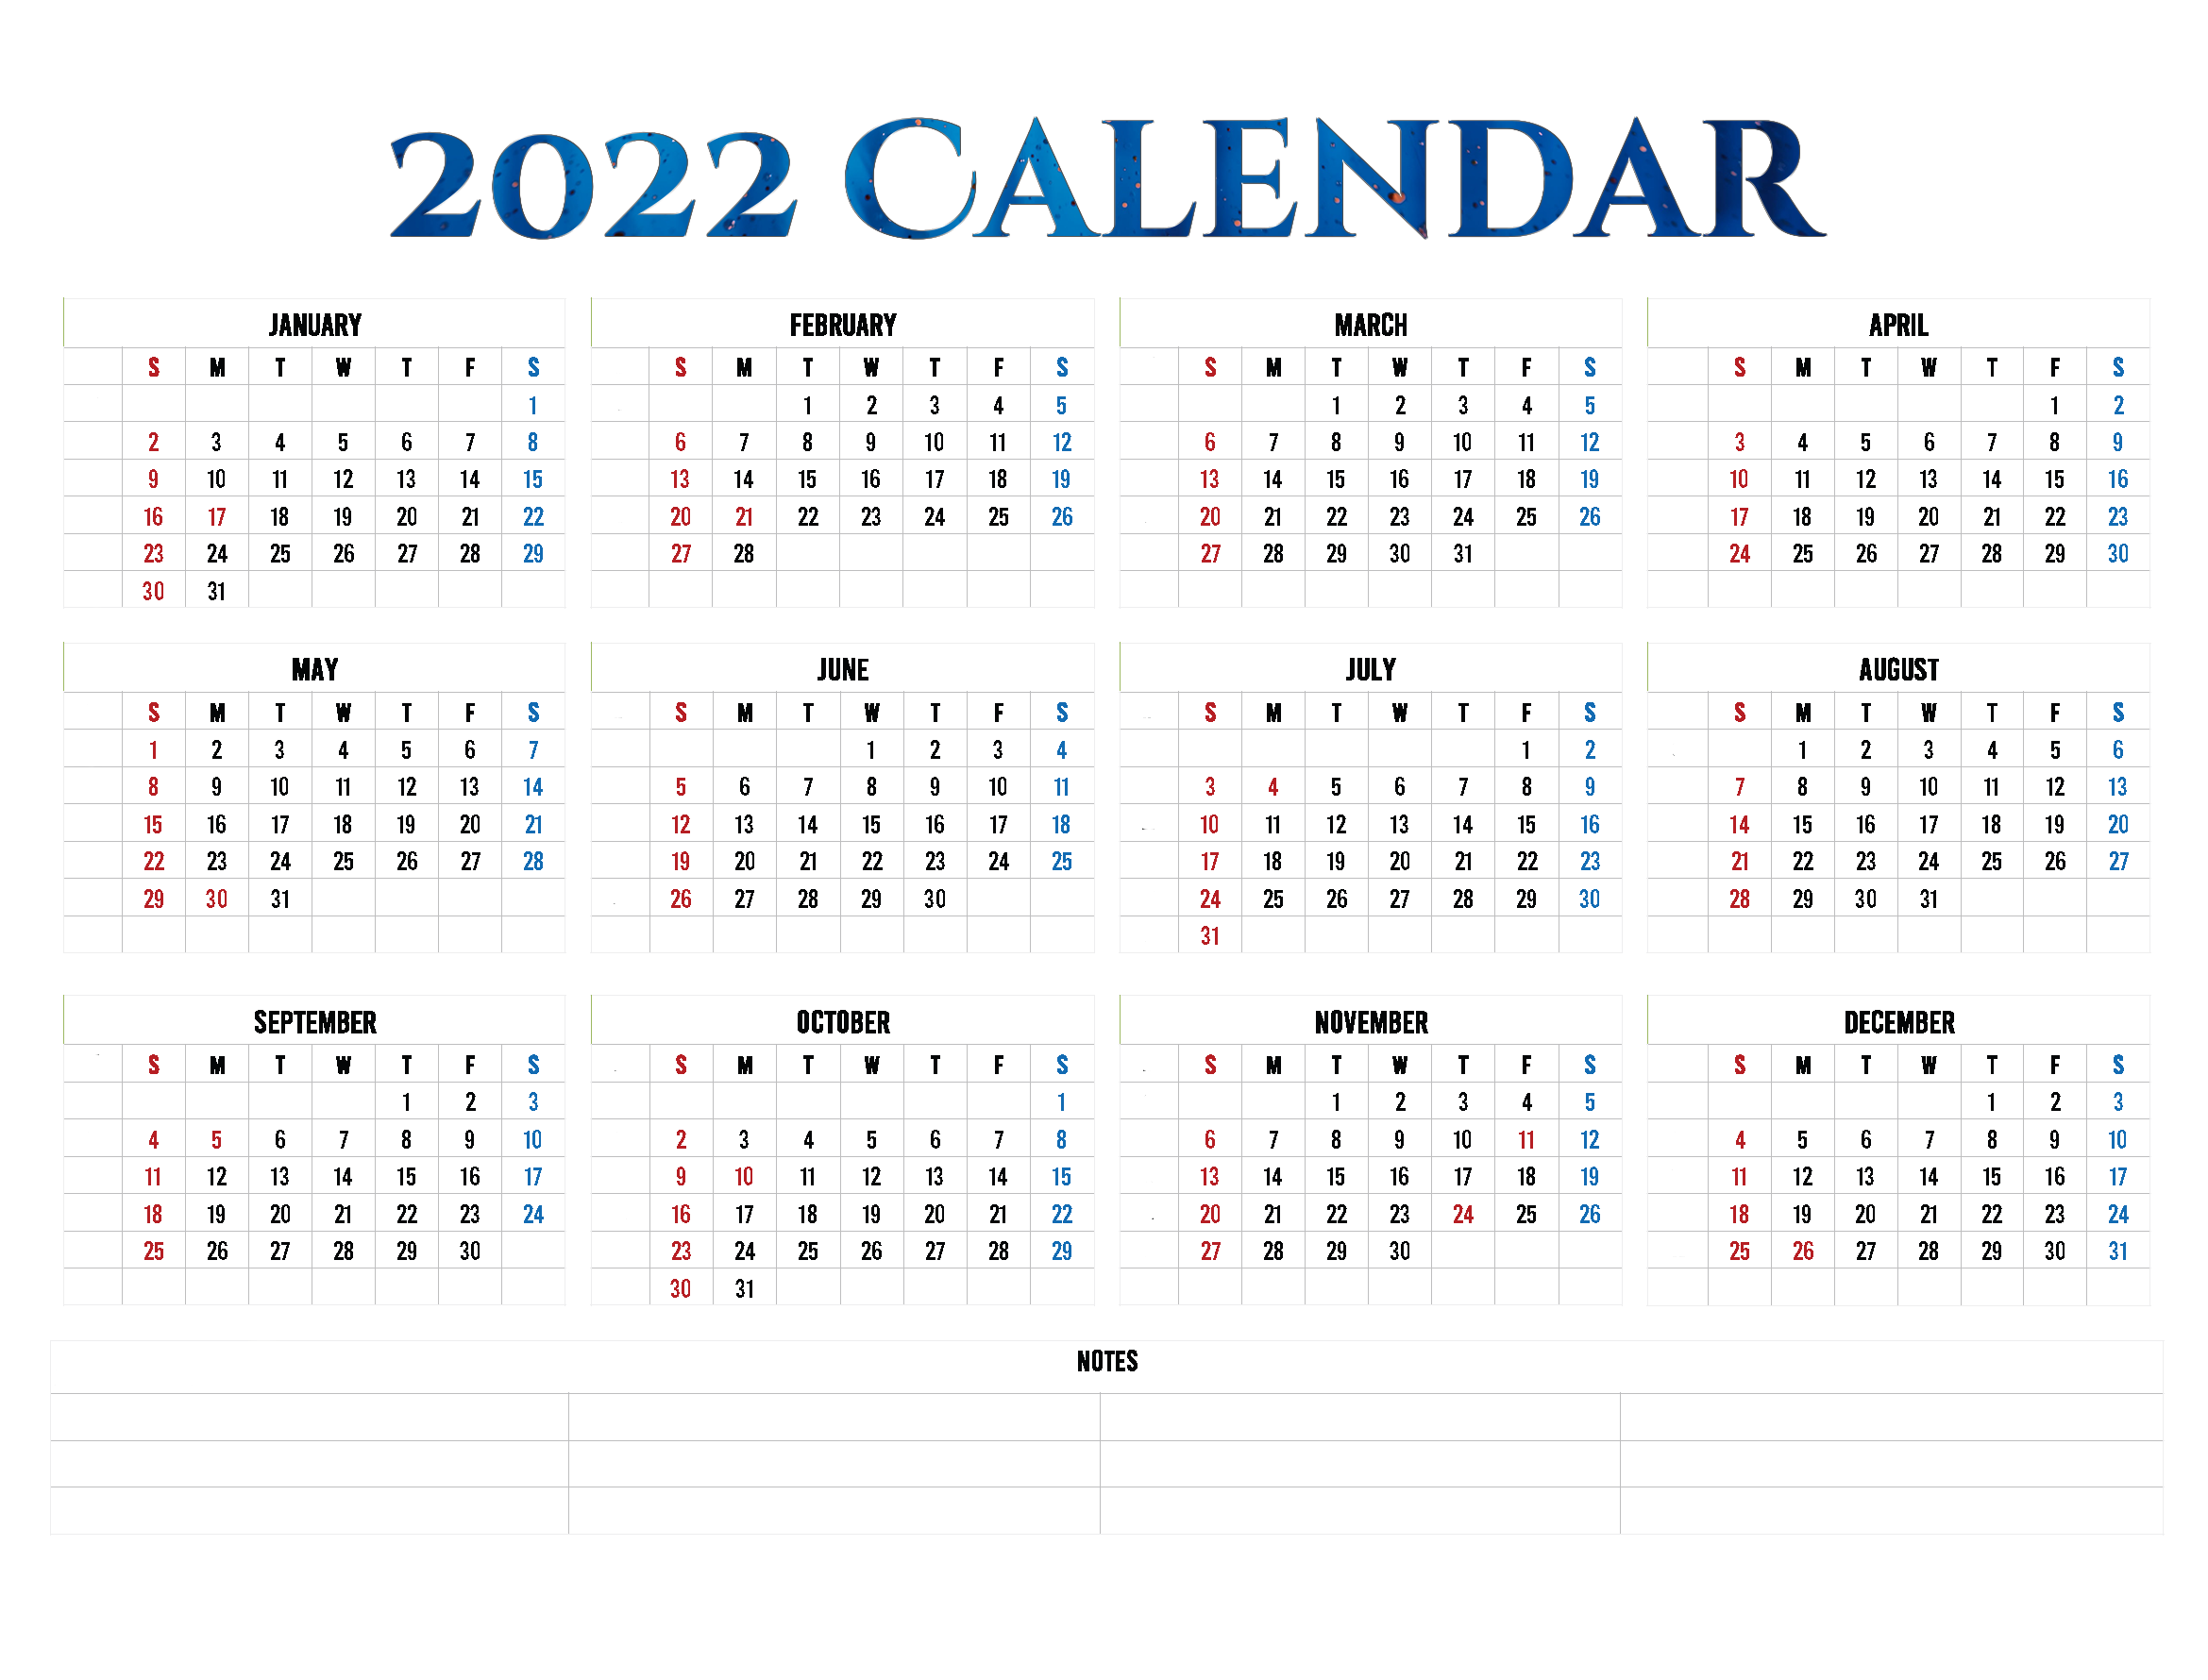 Datebook Preparedness Holidays Scale Time PNG